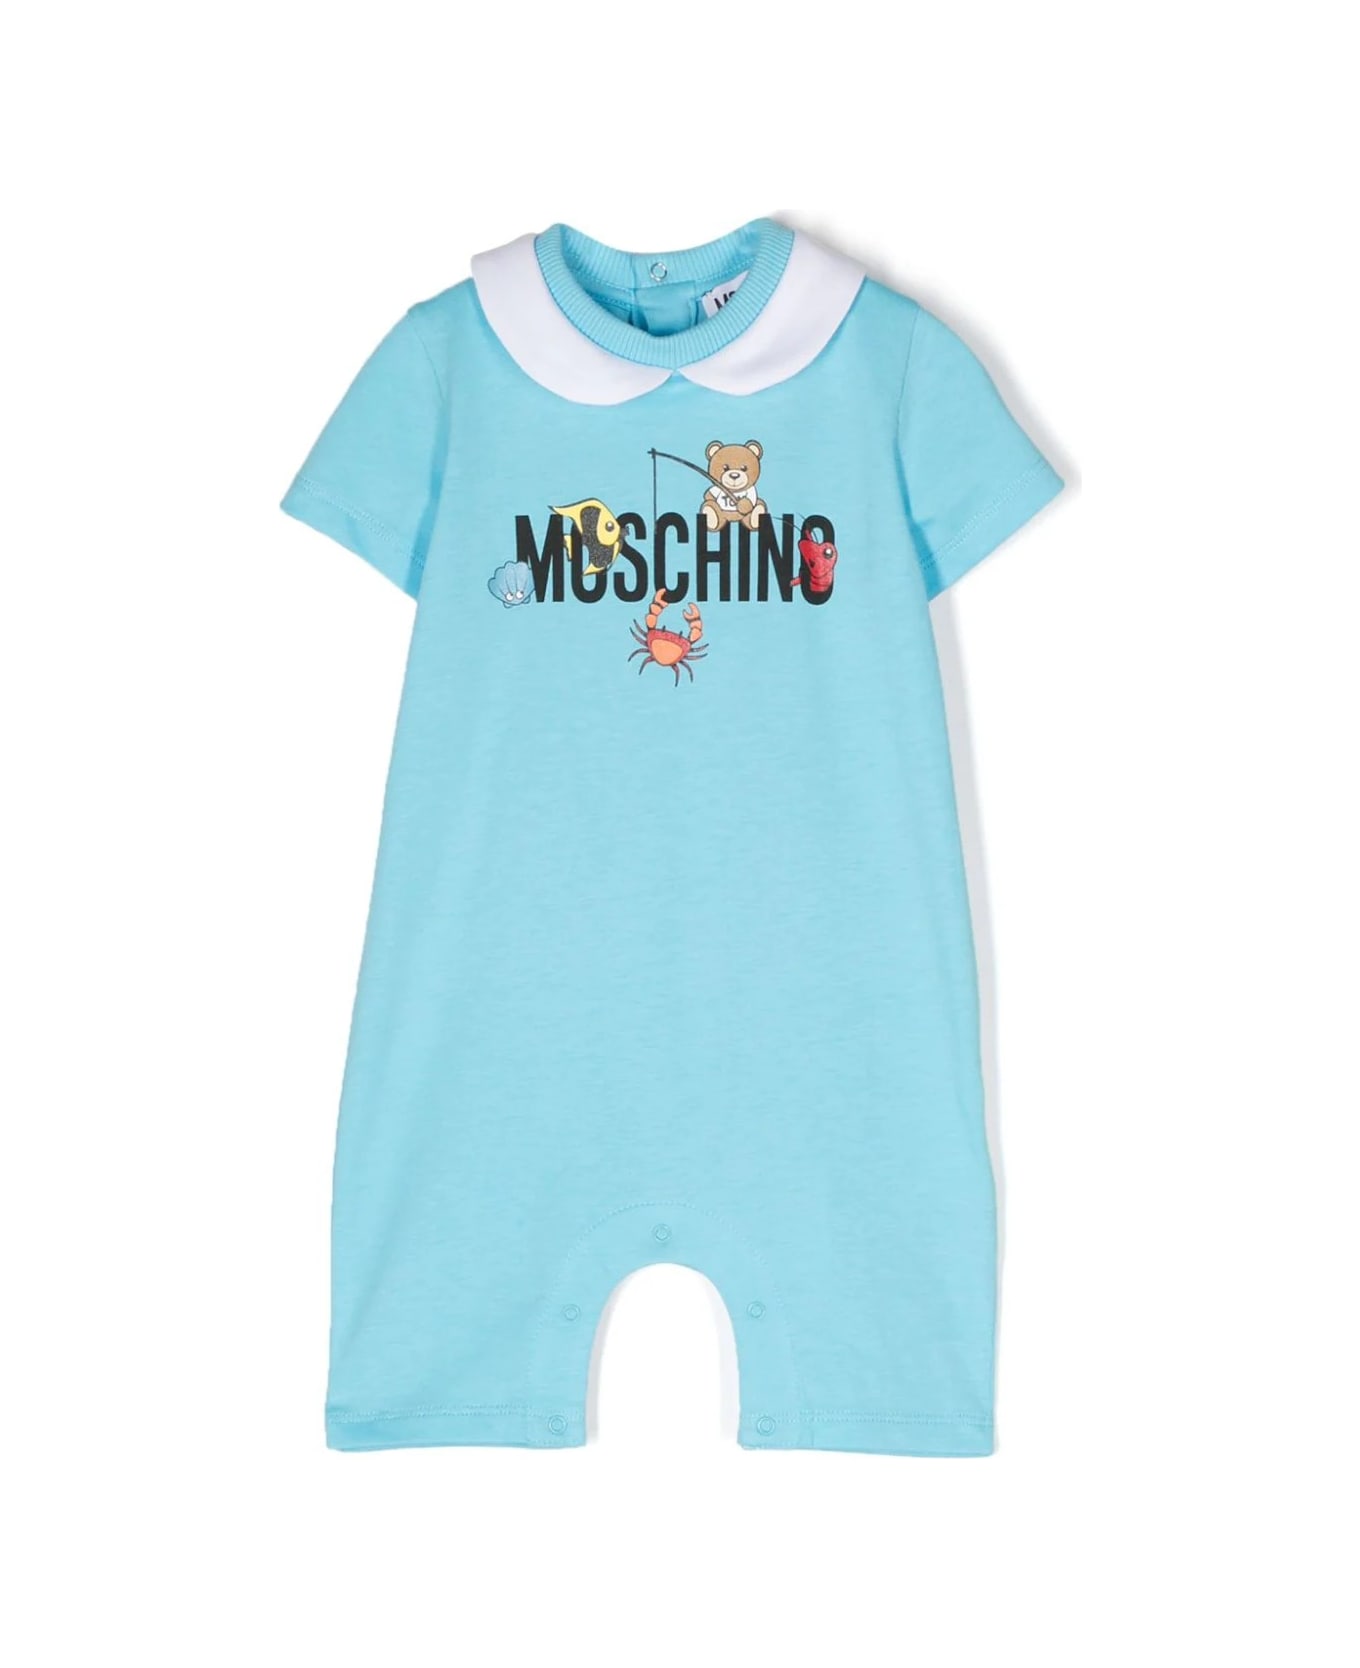 Moschino Short Light Blue Playsuit With Logo And Teddy Bear With Fish - Blue